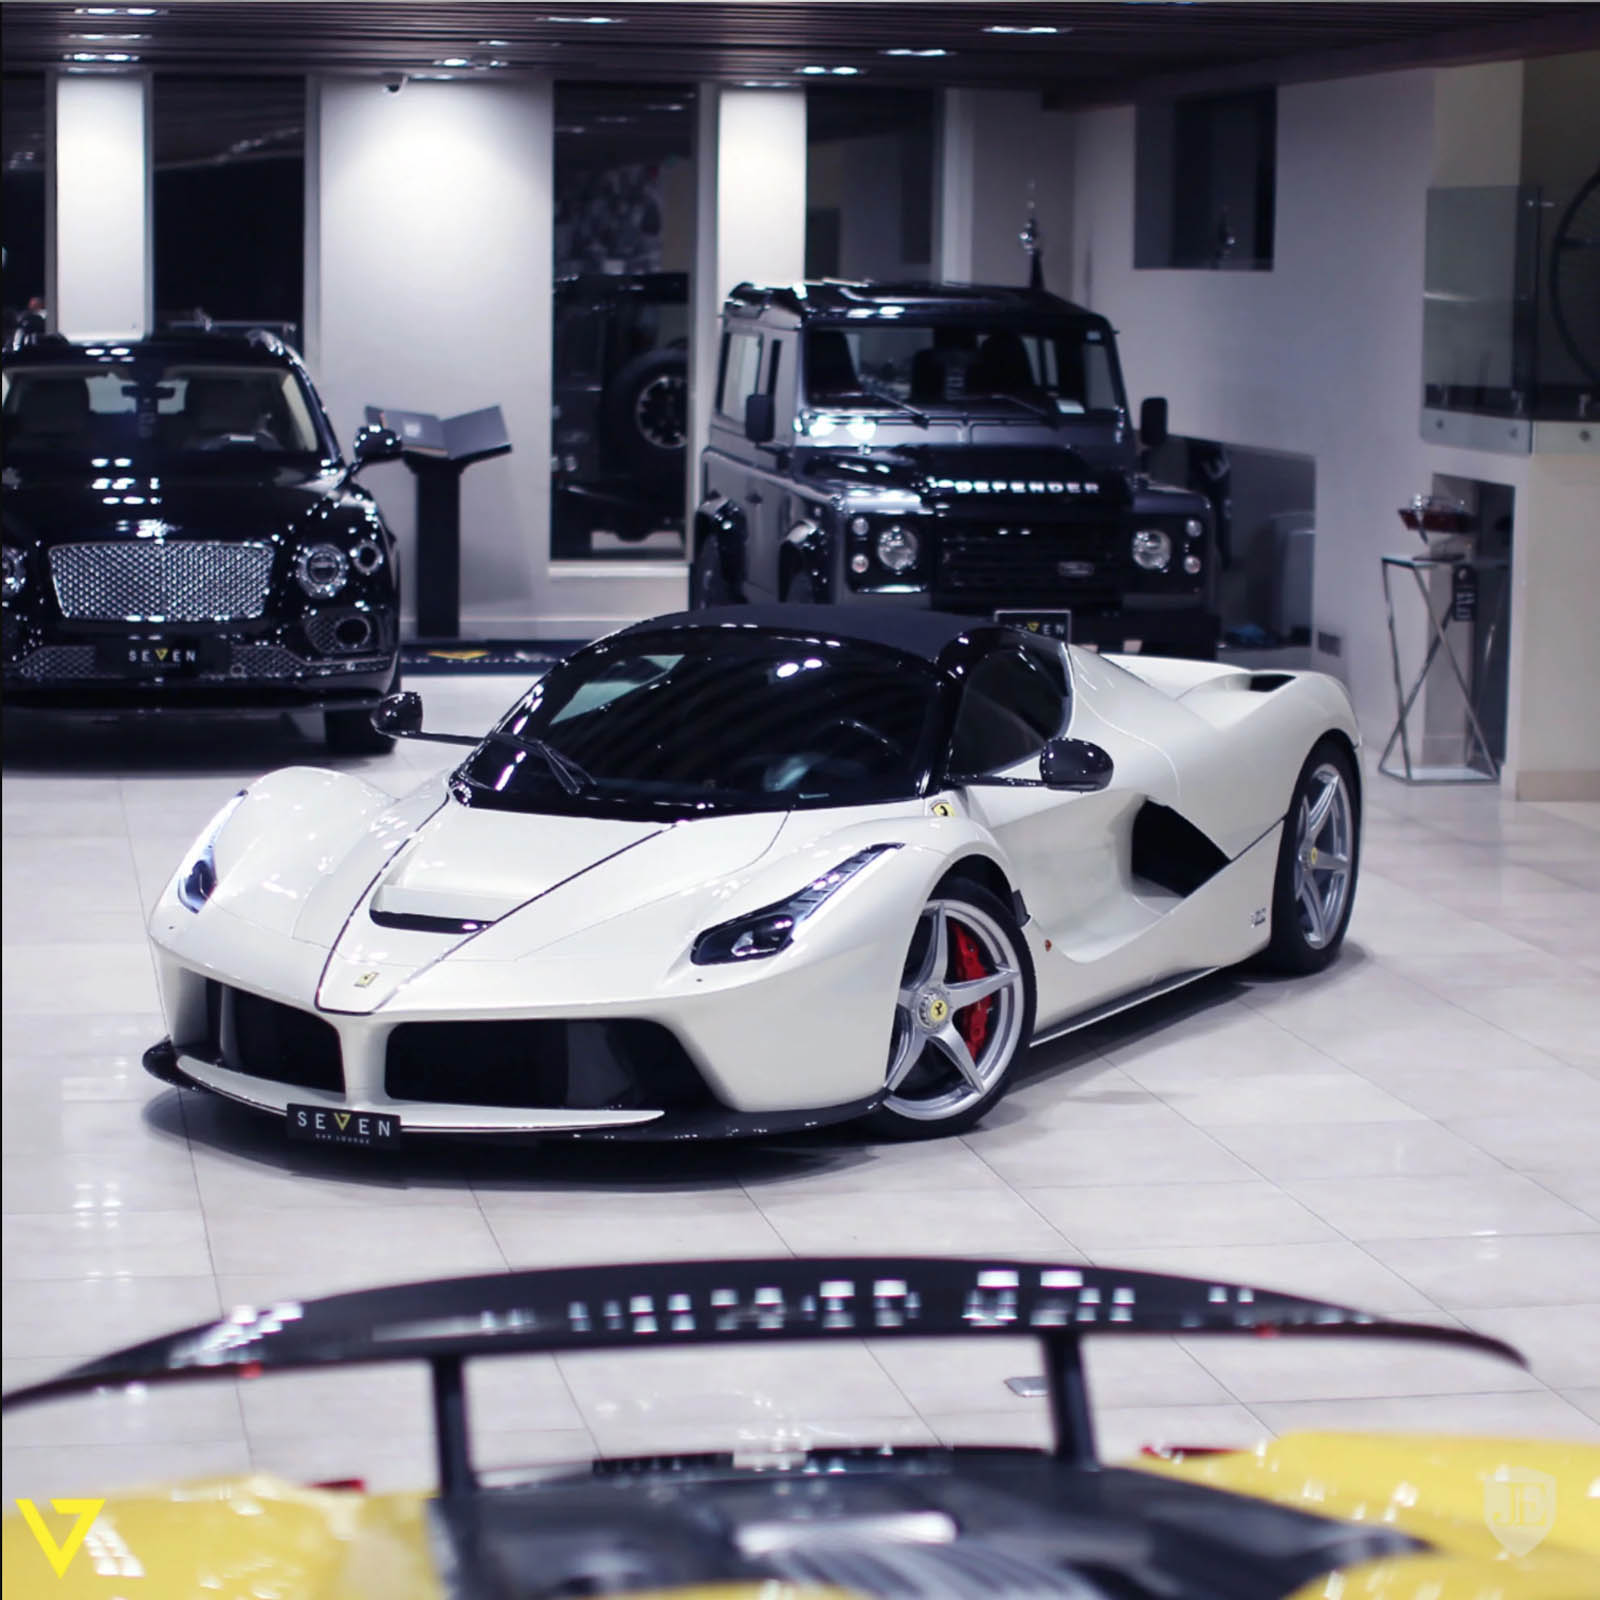 Any Takers For A Brand-New White LaFerrari Aperta? | Carscoops